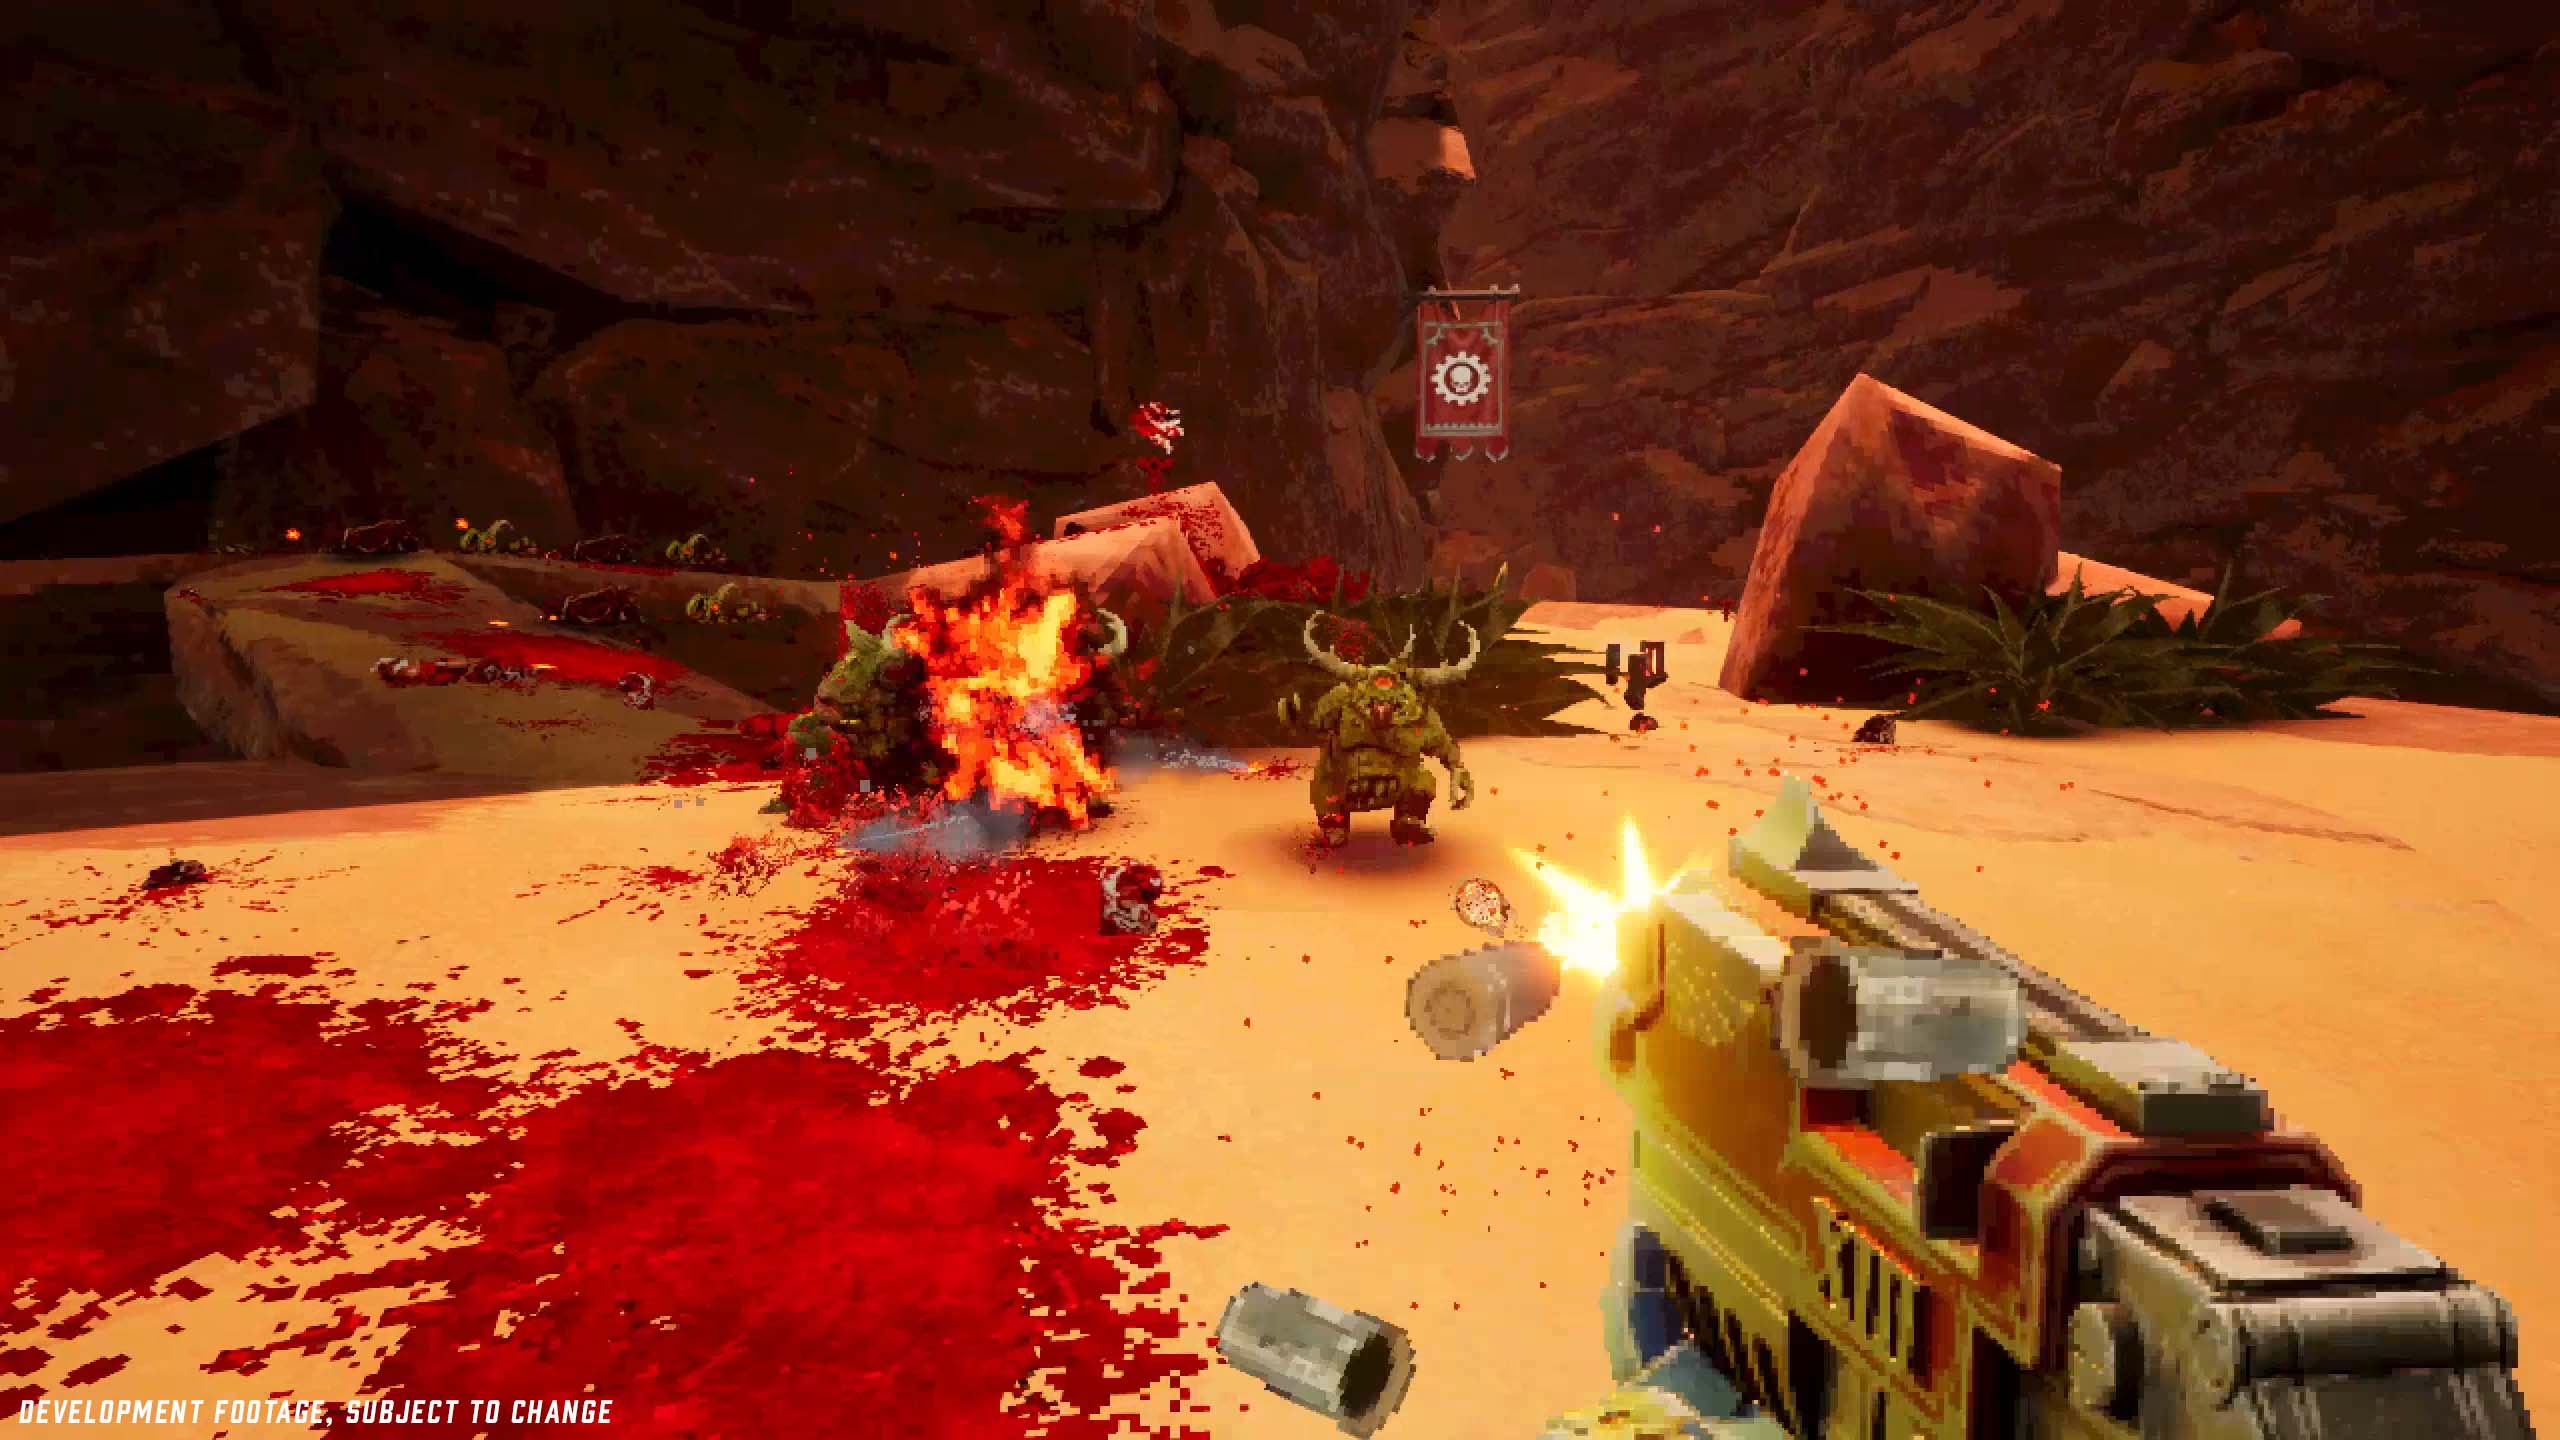 Retro-style first-person shooter Warhammer 40,000 Boltgun announced for PS5, Xbox Series, PS4, Xbox One, Switch, and PC